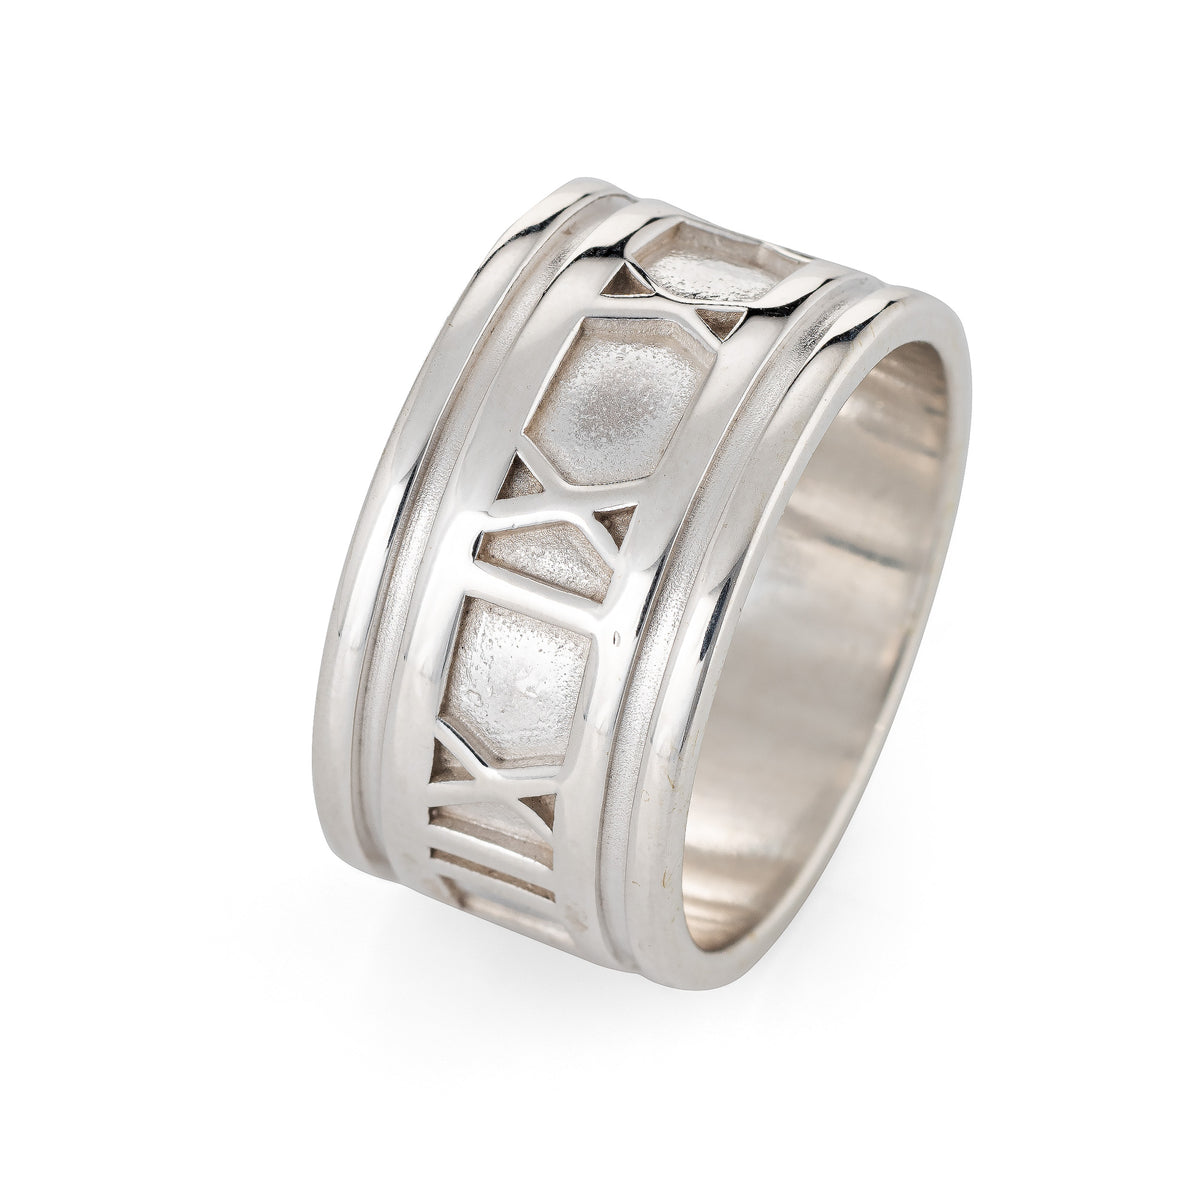 Tiffany and Co. Roman Numeral Atlas Ring